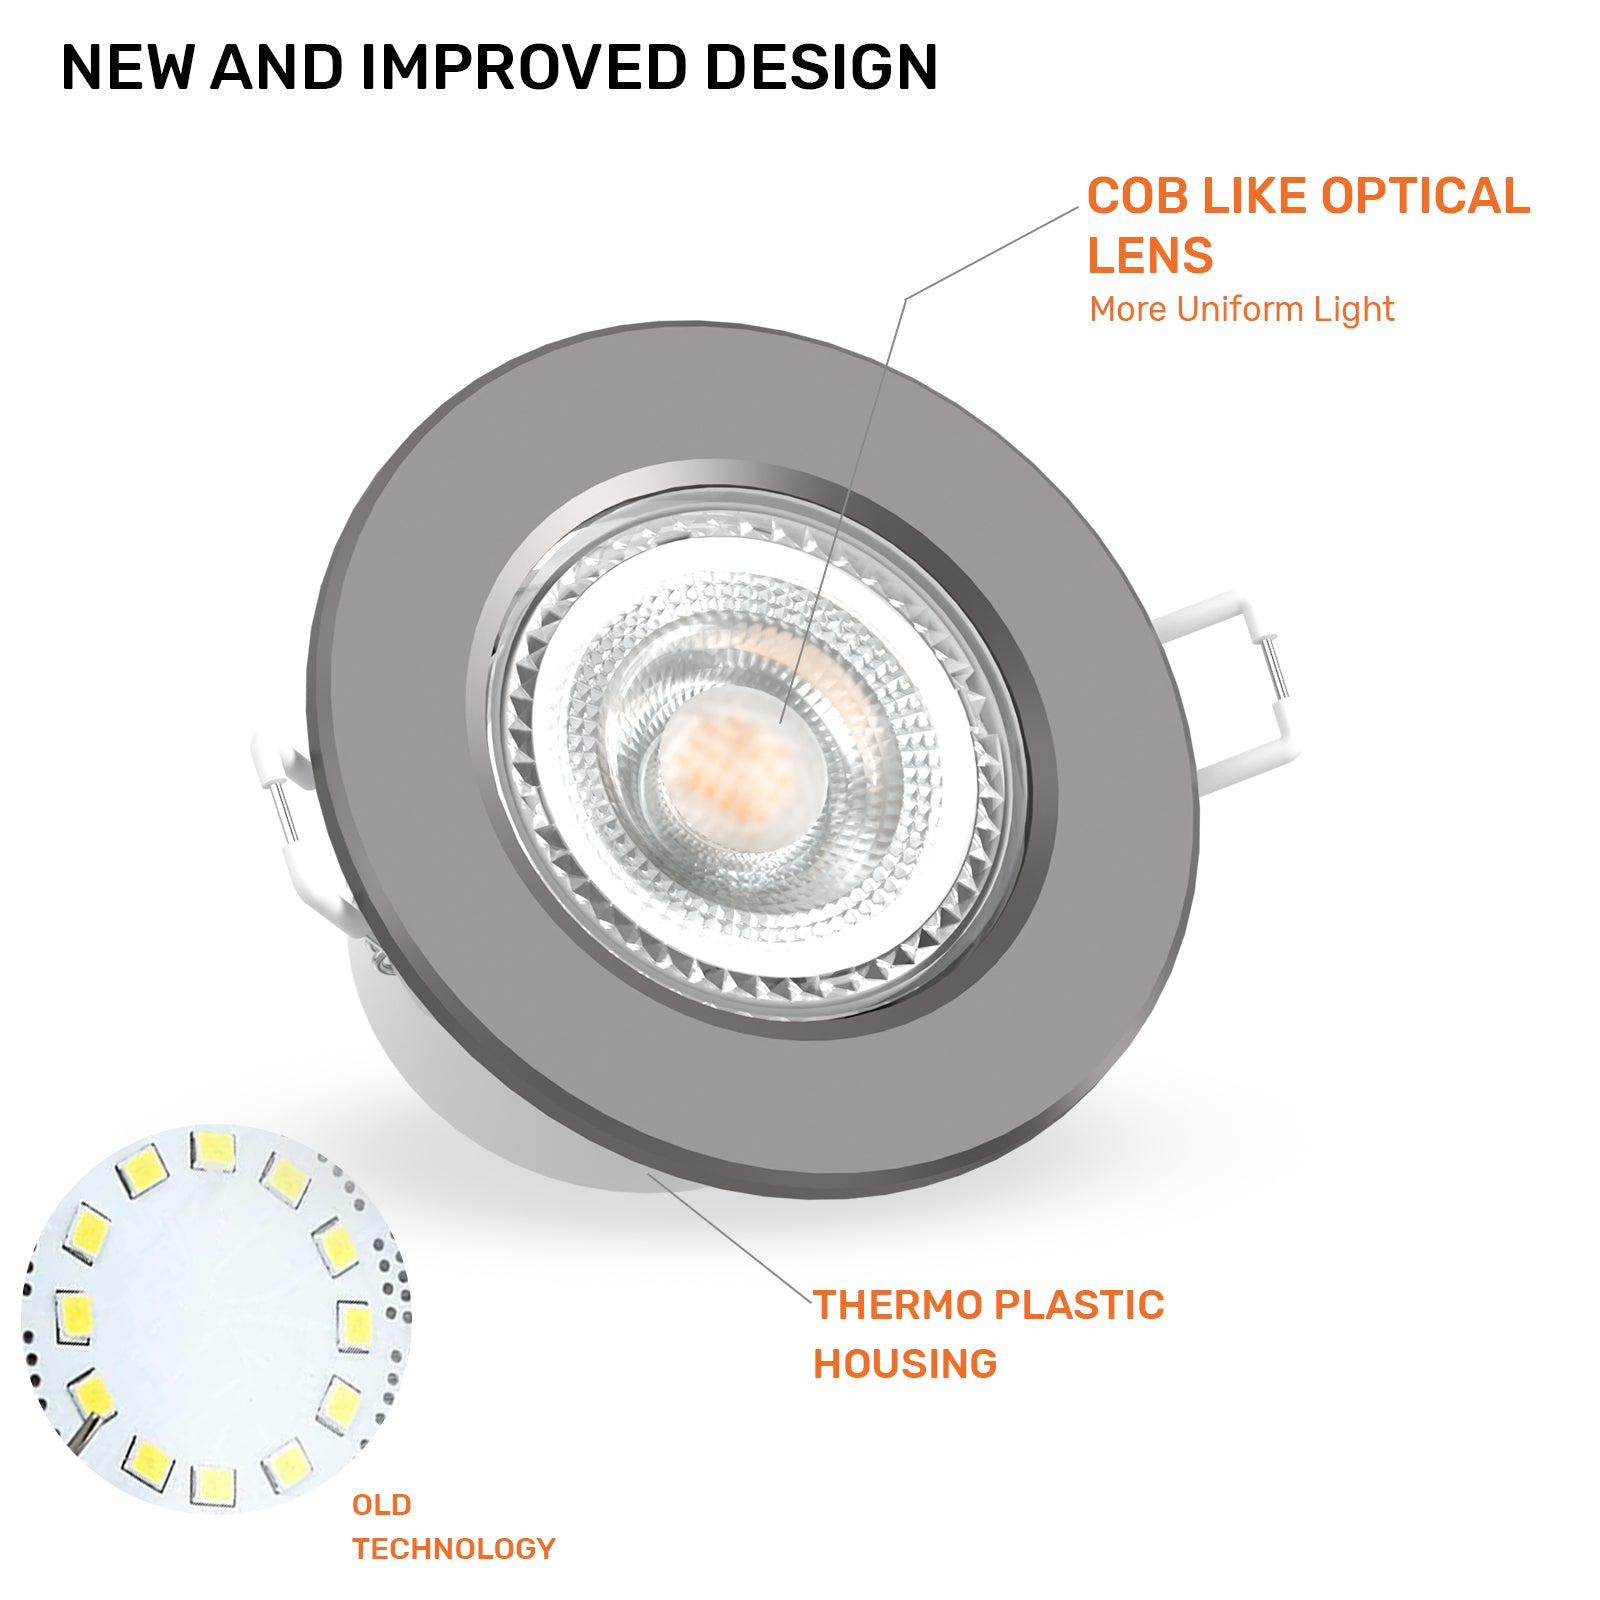 Paul Russells 4.8W LED Non Fire Rated Tiltable Downlight, Warm/Cool/Day White 3 Adjustable CCT, IP44, Chrome Bezel